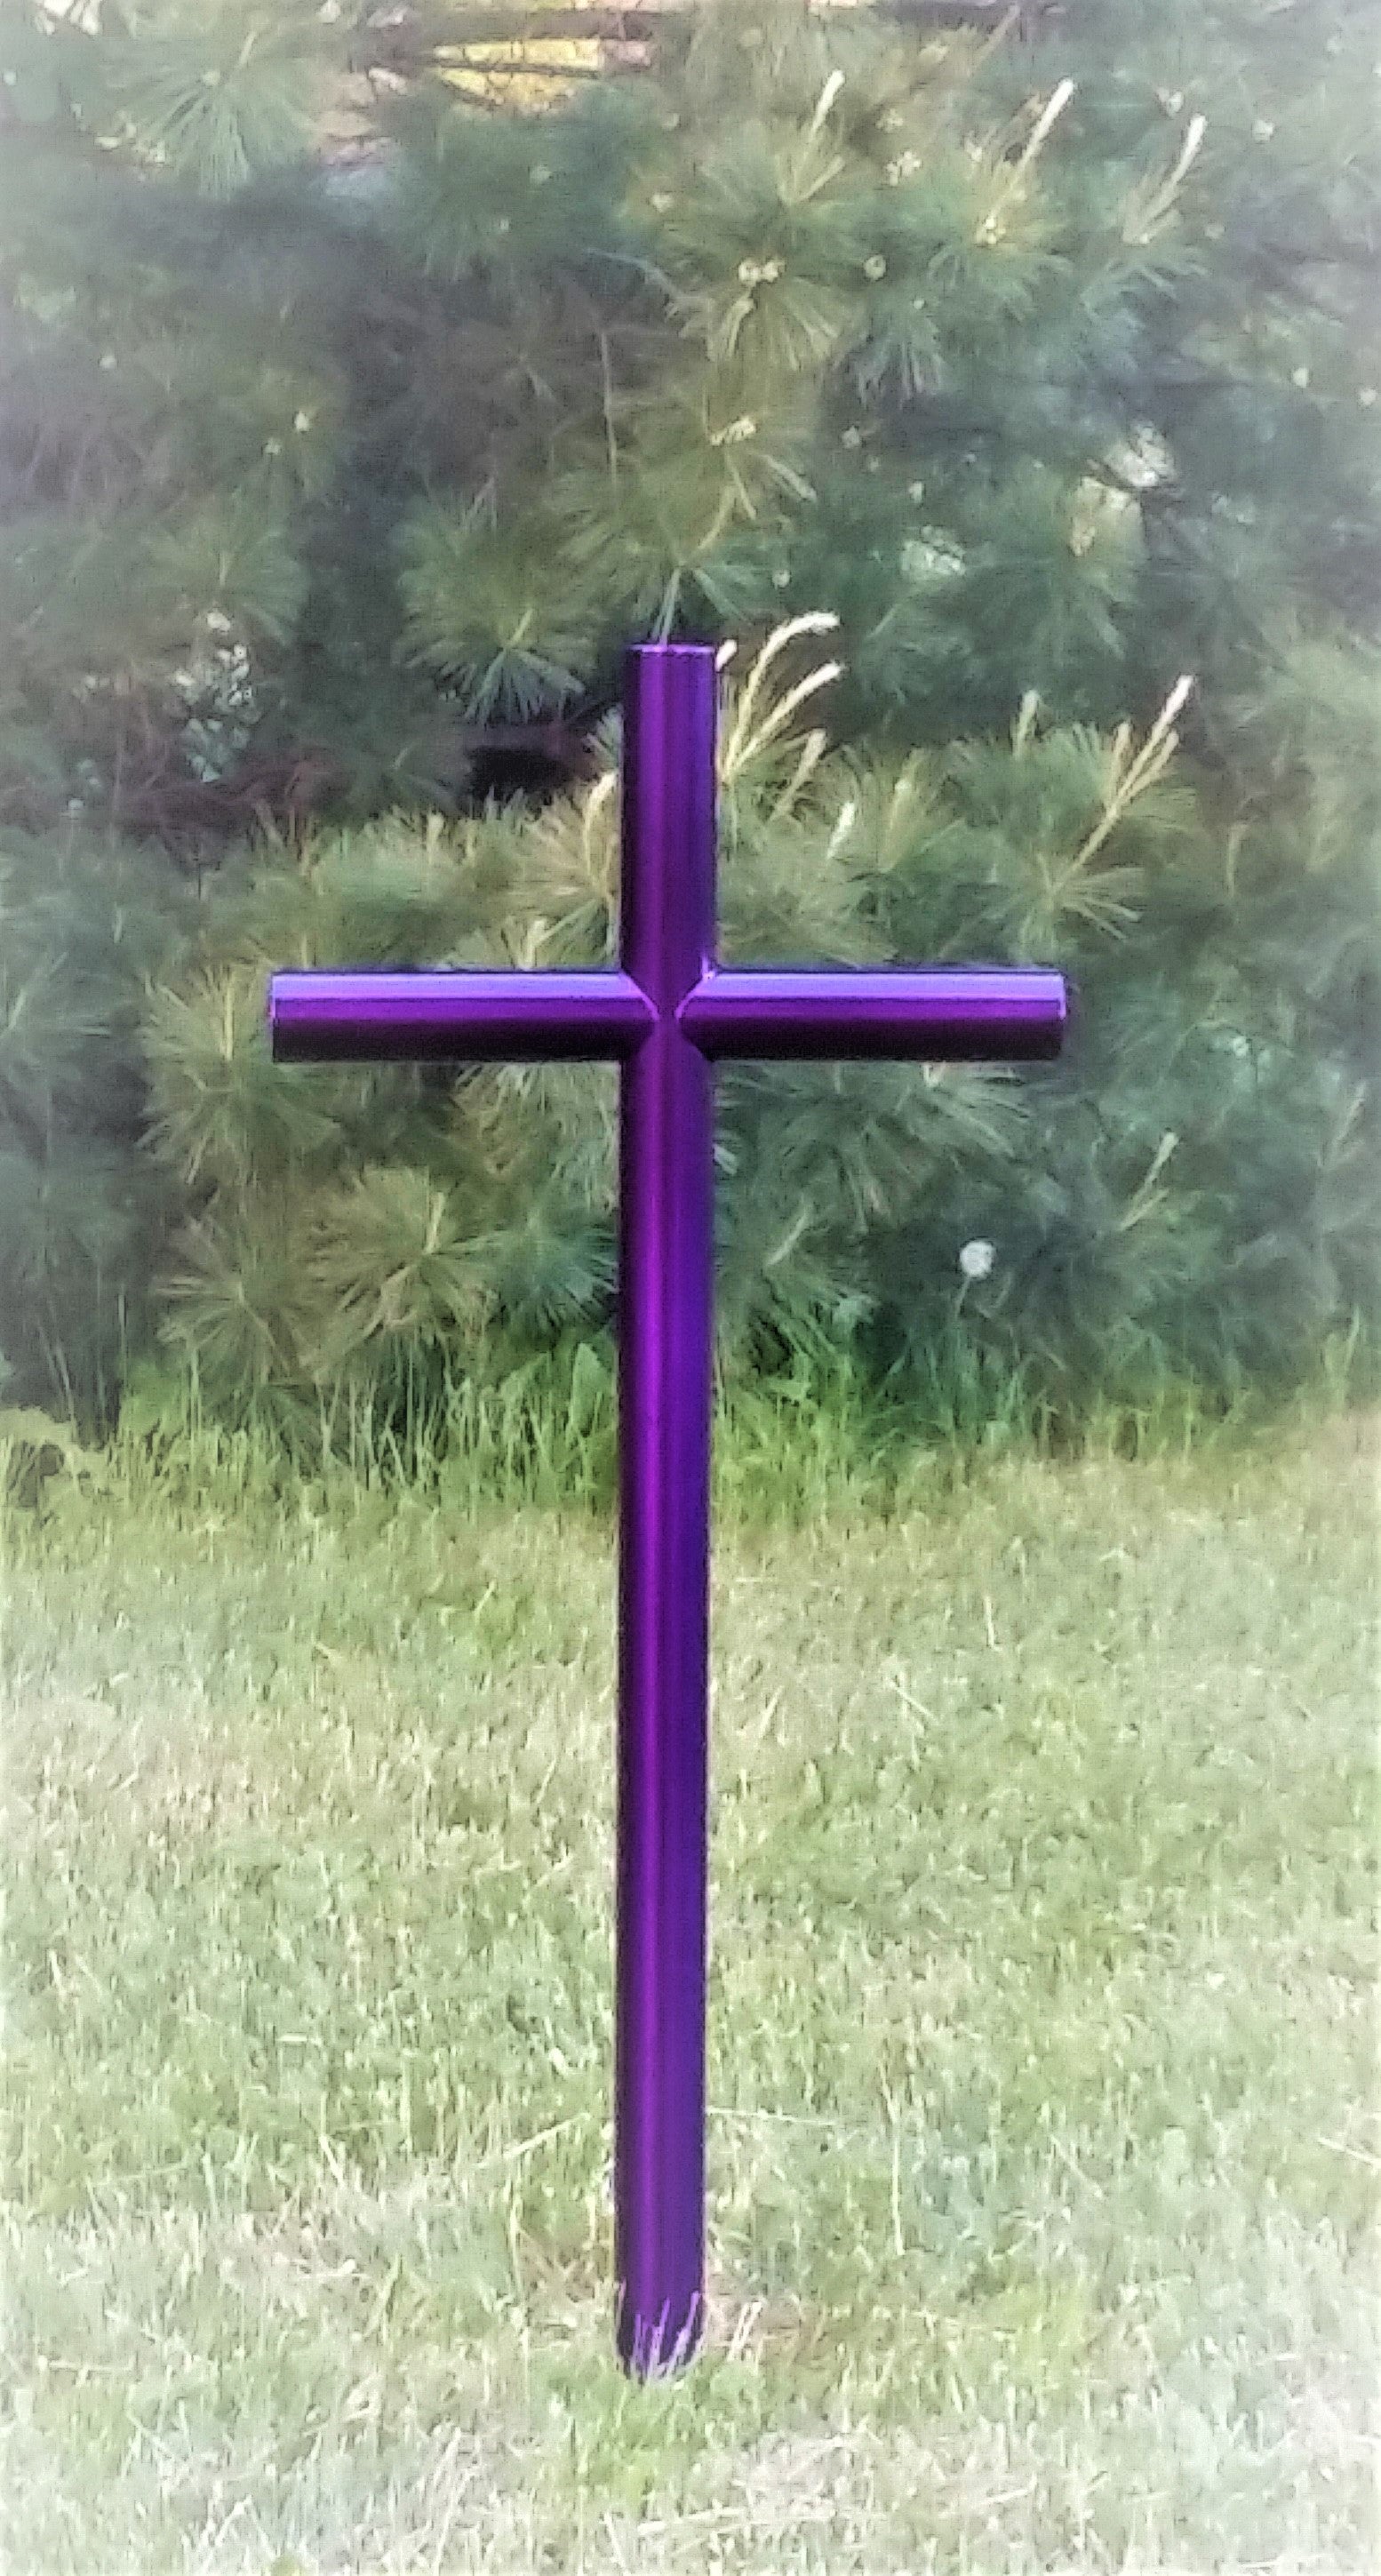 Everlasting Cross Purple Memorial is A Unique Monument of Your Loved One Loss. Canada Cremation Urn Container, Engraved Memorial Roadside, Pet, Outdoor, For Our Loved One Loss. Death Can Be Heartbreaking, Our Memories Bring Us Joy of Times Shared